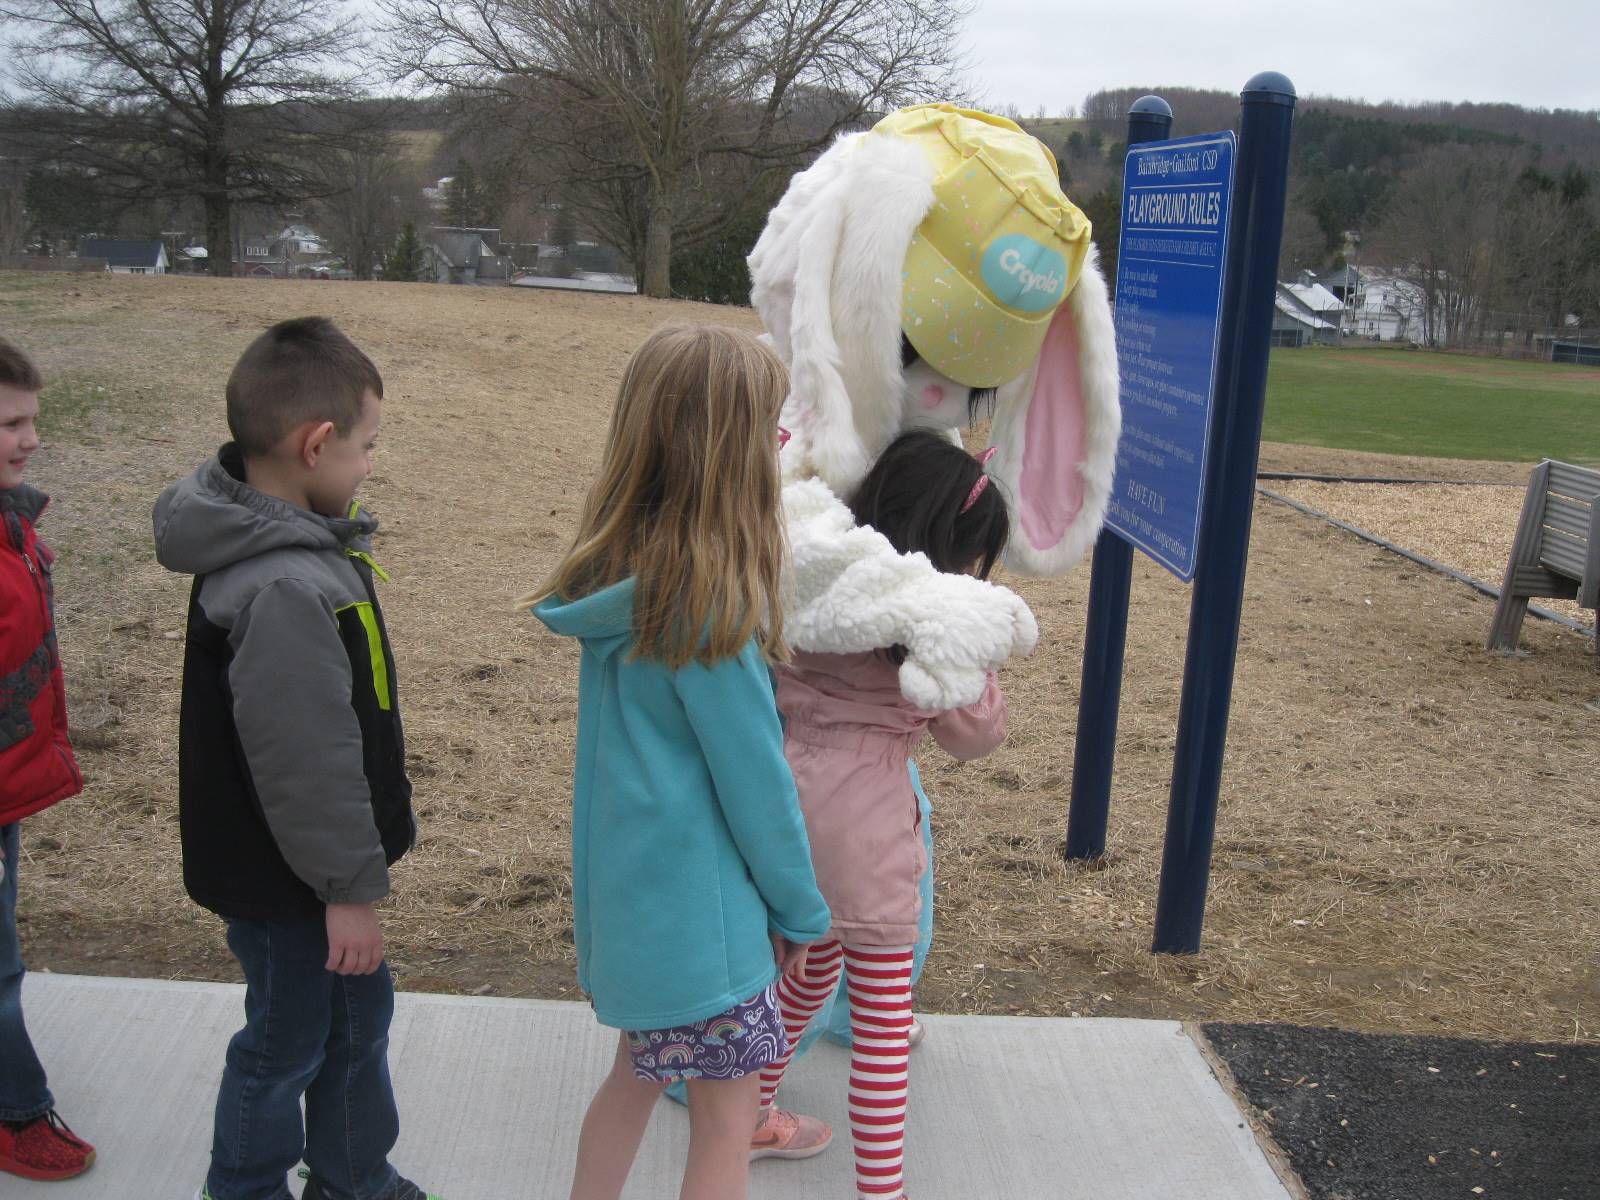 Easter Bunny hugs a student while 2 others wait their turn.